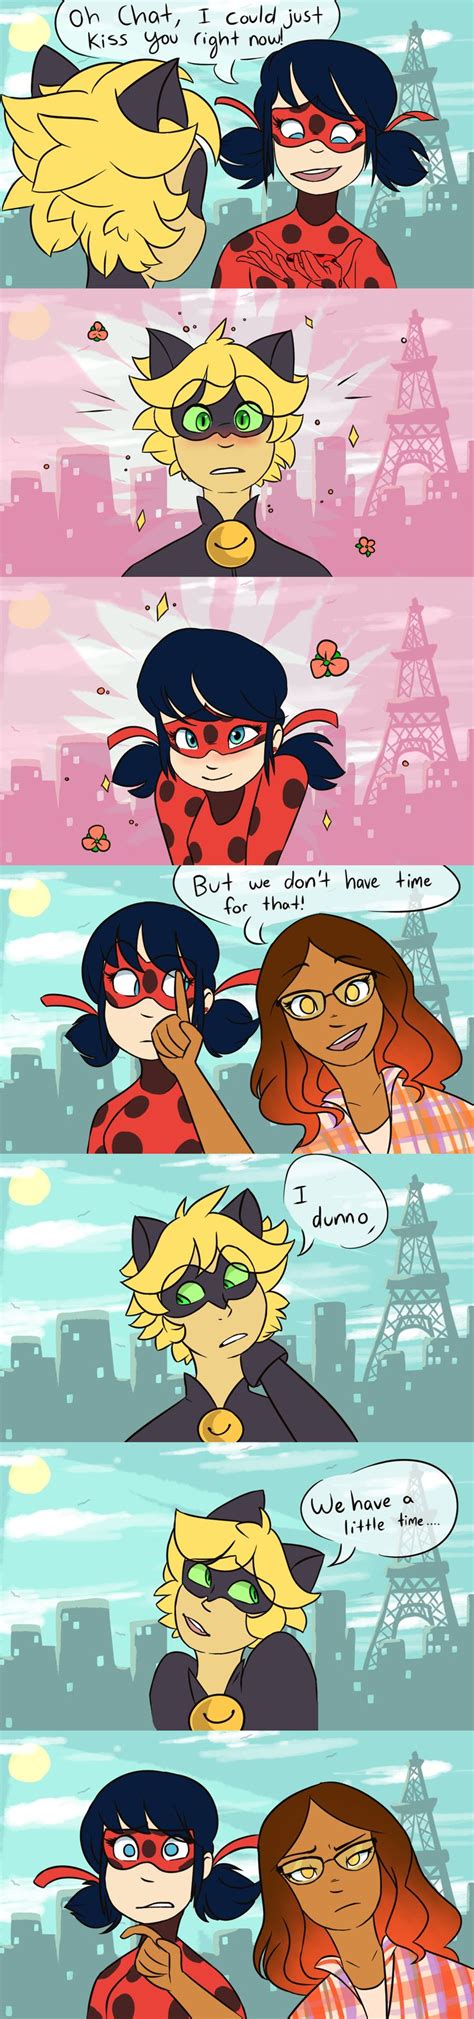 pin by tris cafe on miraculous ladybug miraculous ladybug funny miraculous ladybug comic